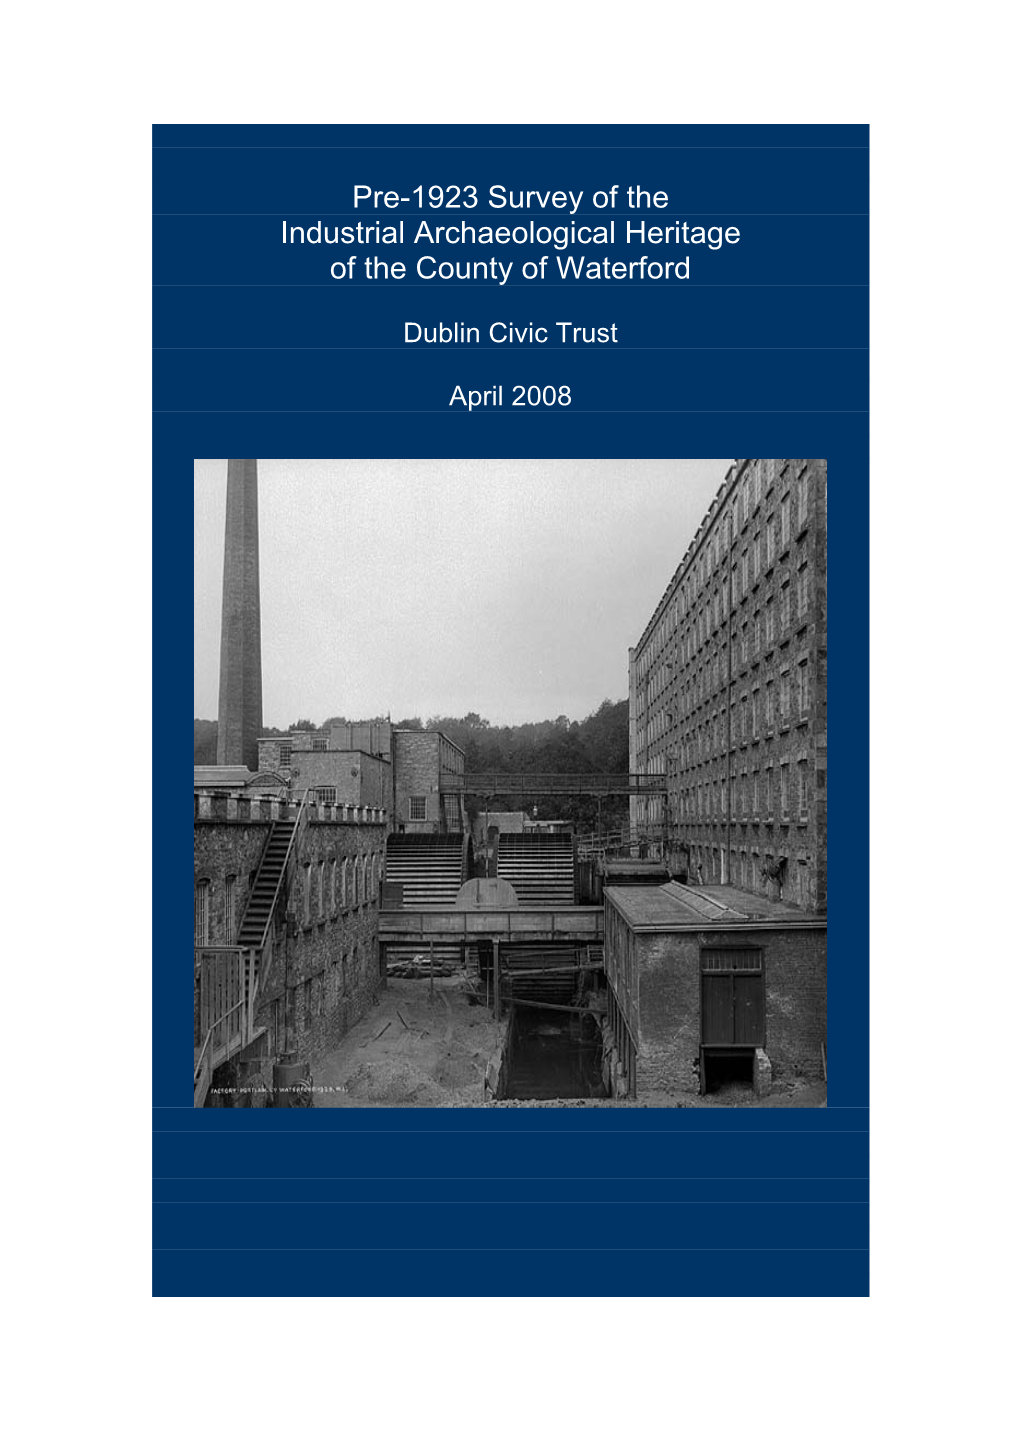 Waterford Industrial Archaeology Report